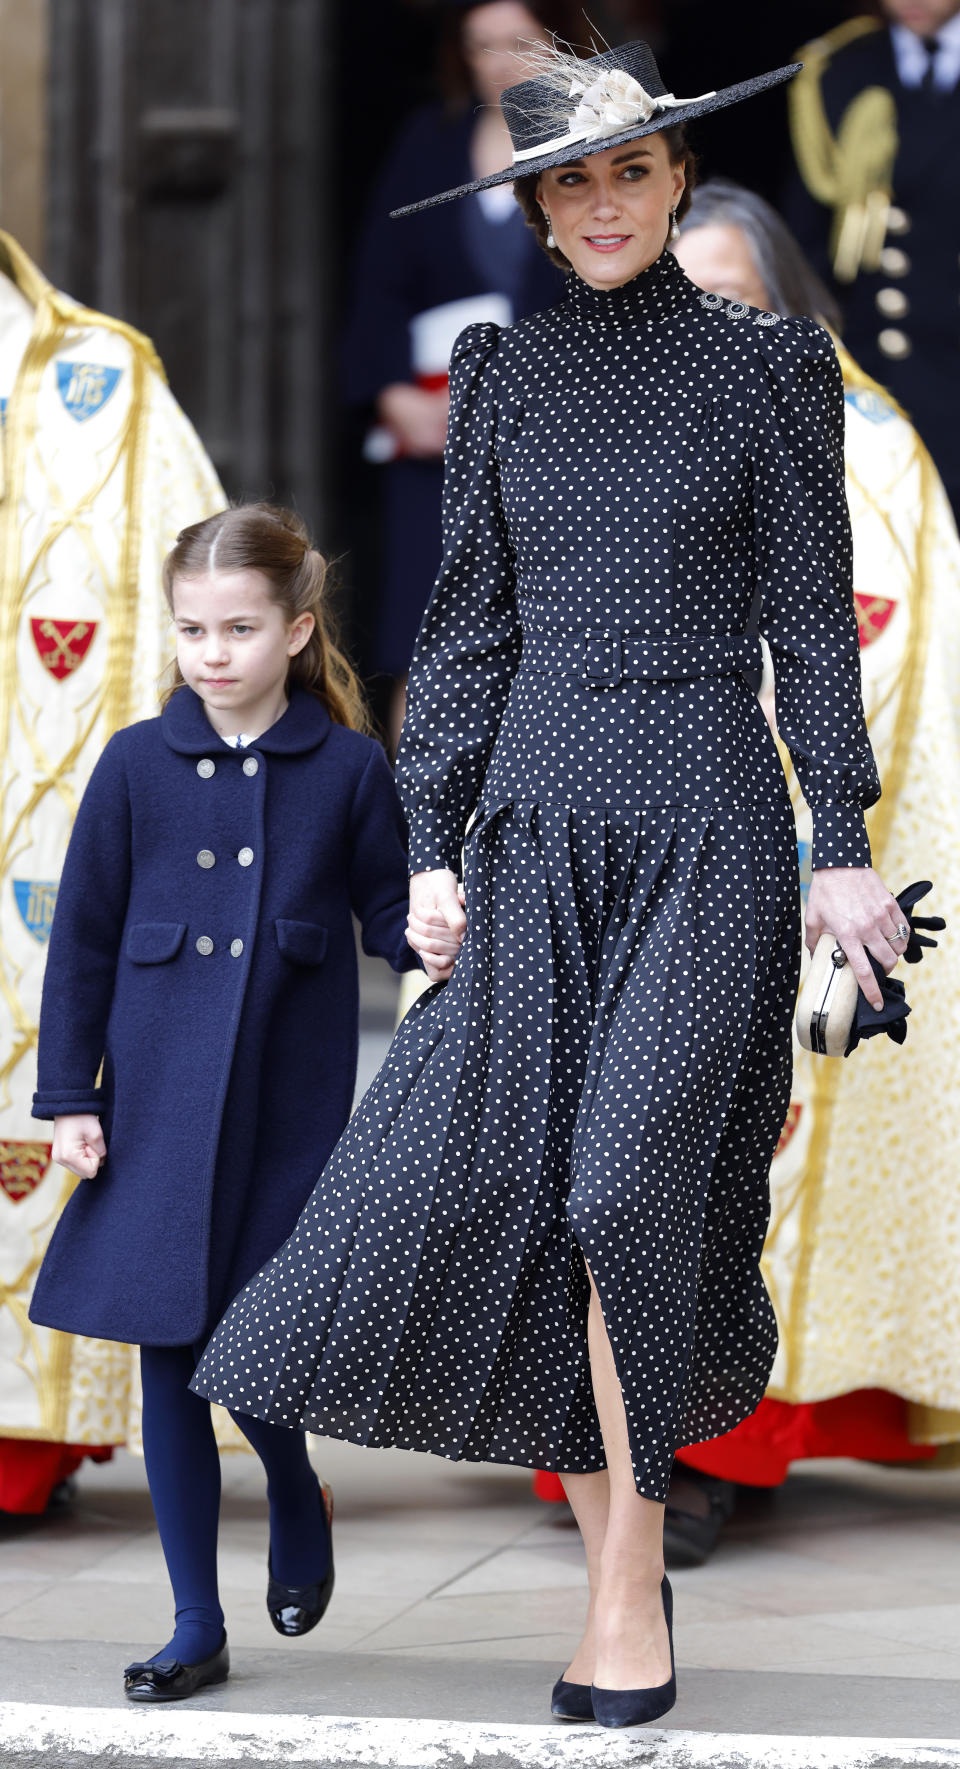 Princess Charlotte held onto her mother's hand as she arrived at the Abbey. (Getty Images)